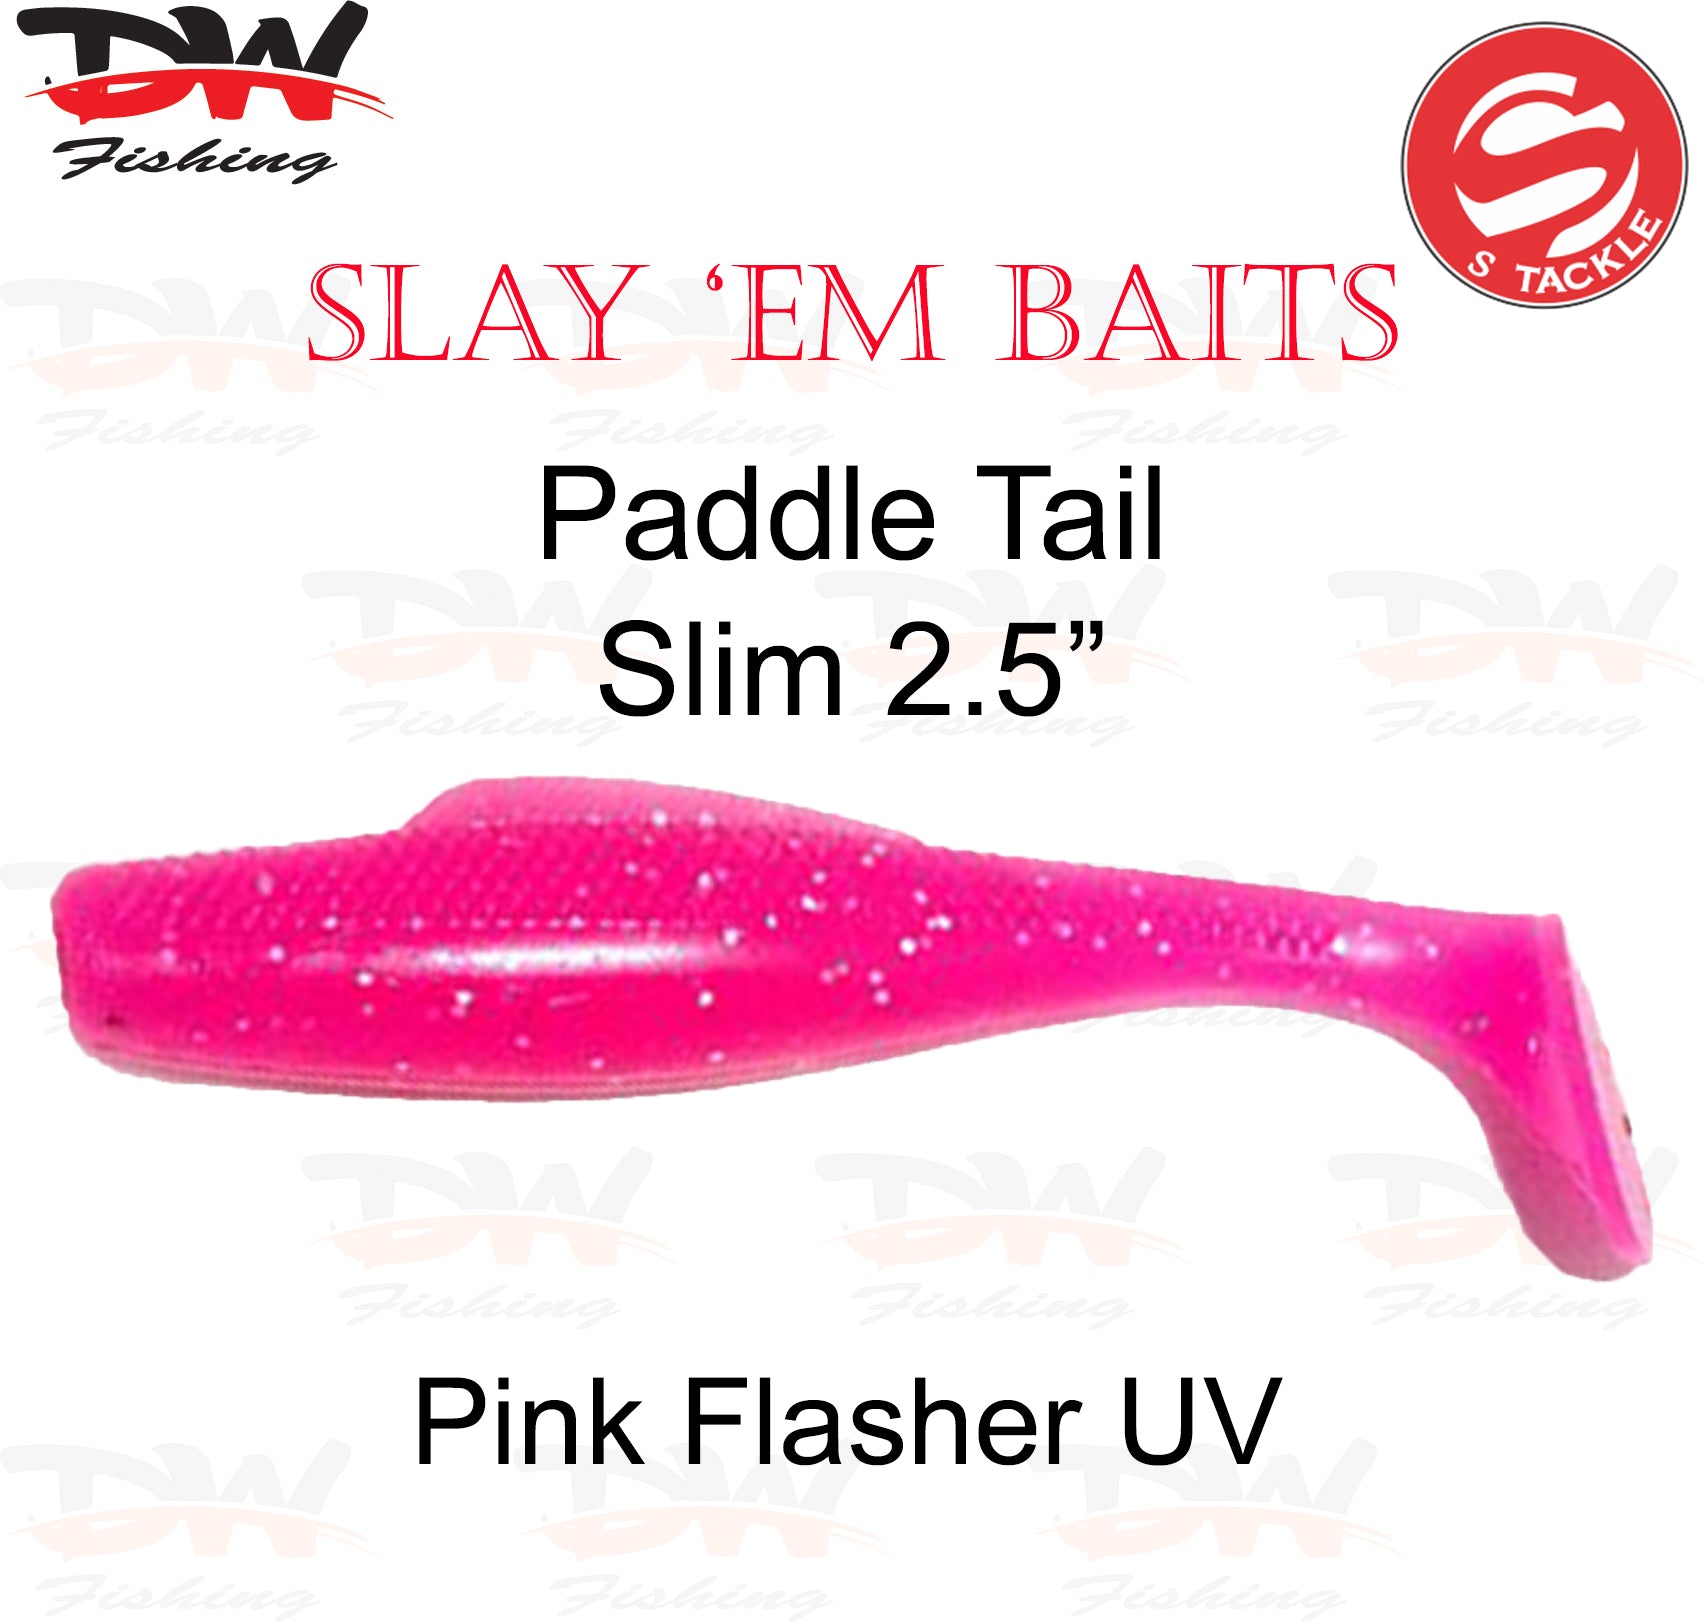 S Tackle 2.5 inch paddle tail slim soft plastic lure Colour Pink Flasher UV